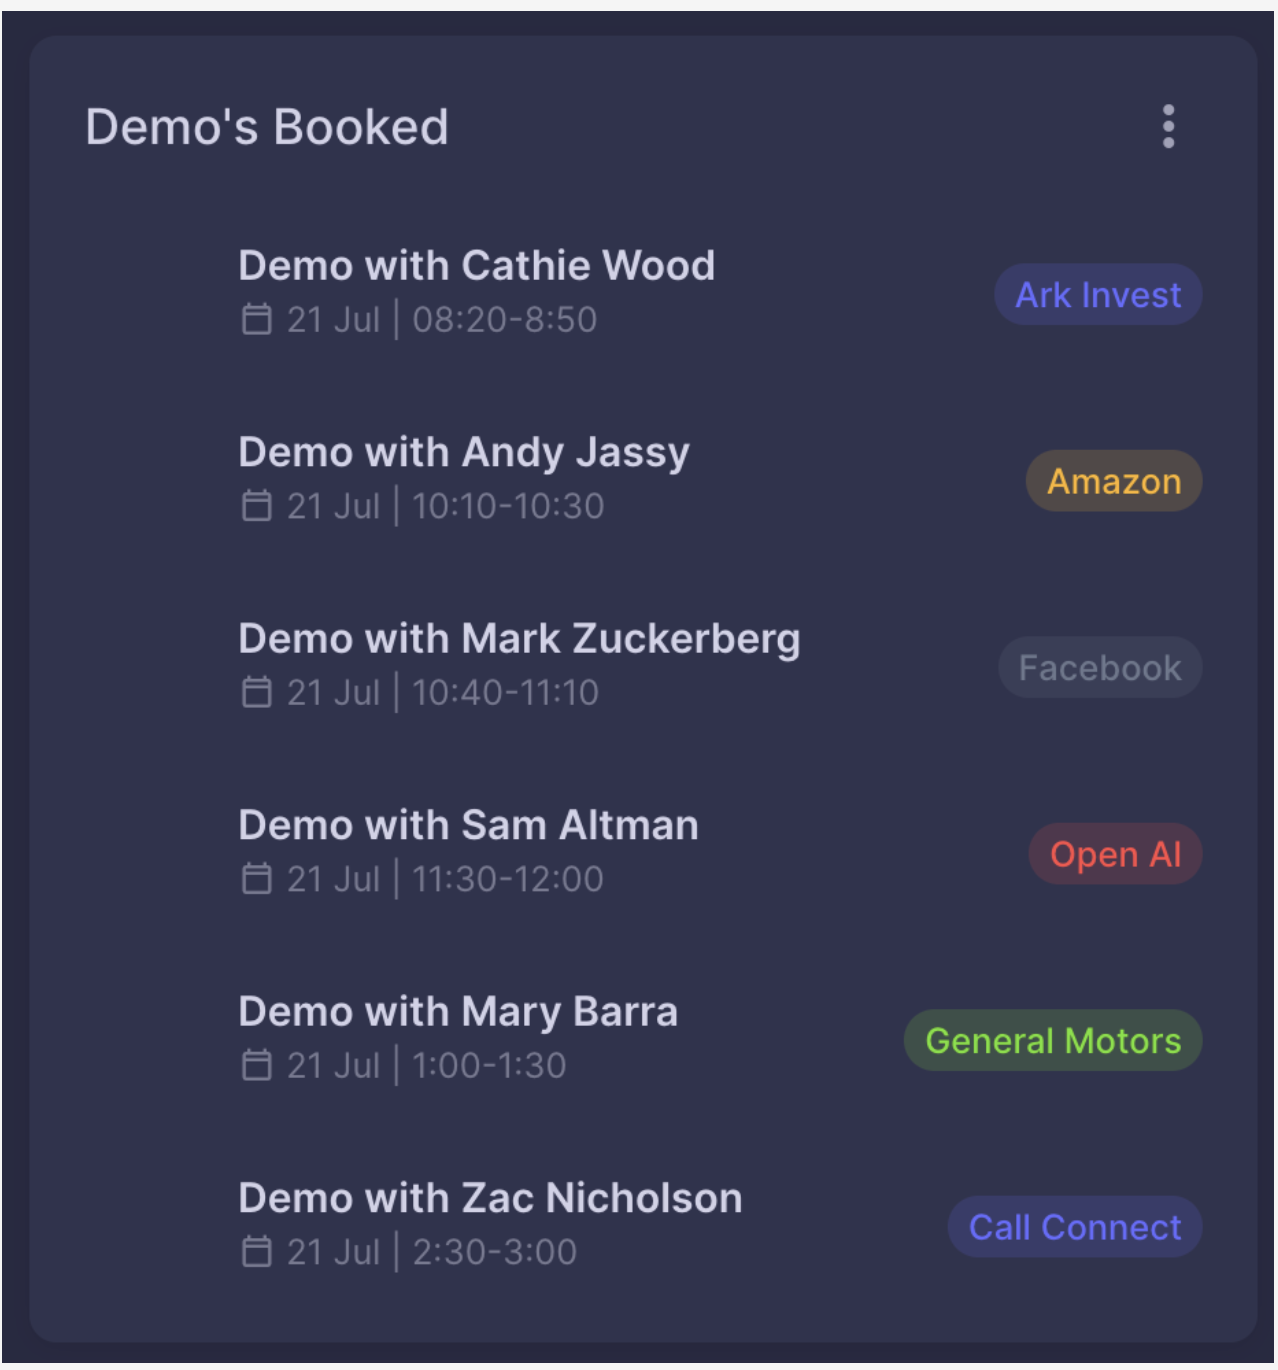 AI-Powered Sales Calls - Namely AI Booked Demos